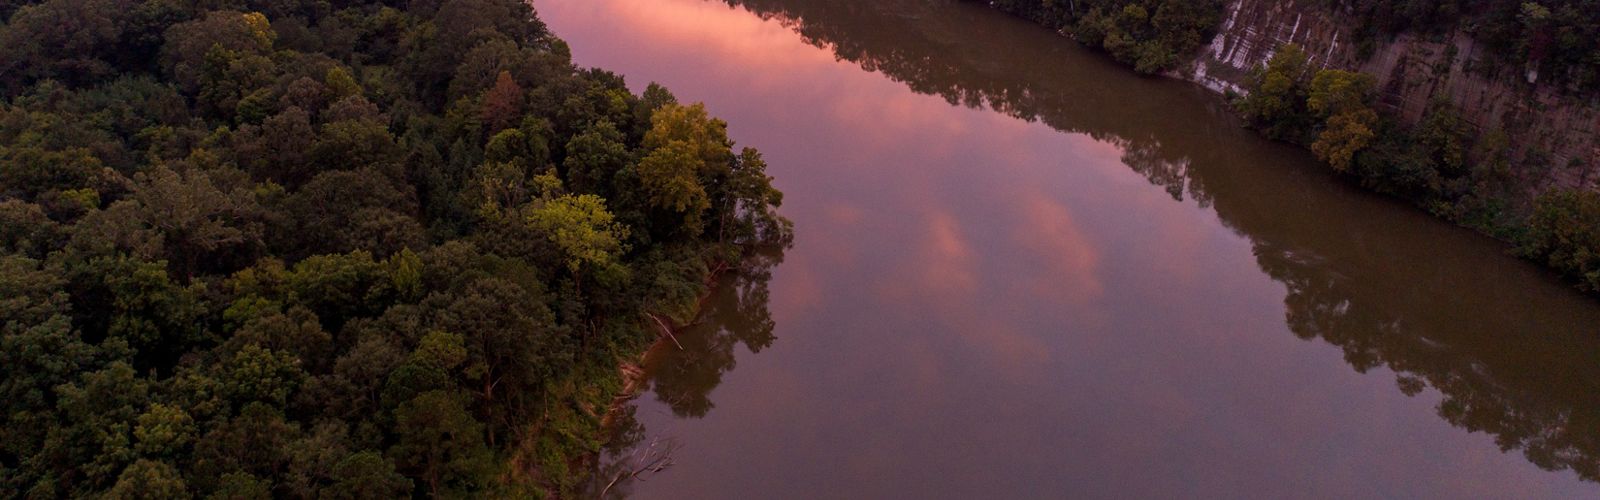 A river bordered by tall rocky bluffs on one side and dense forest on the other reflects the sunset in purple and pink hues.